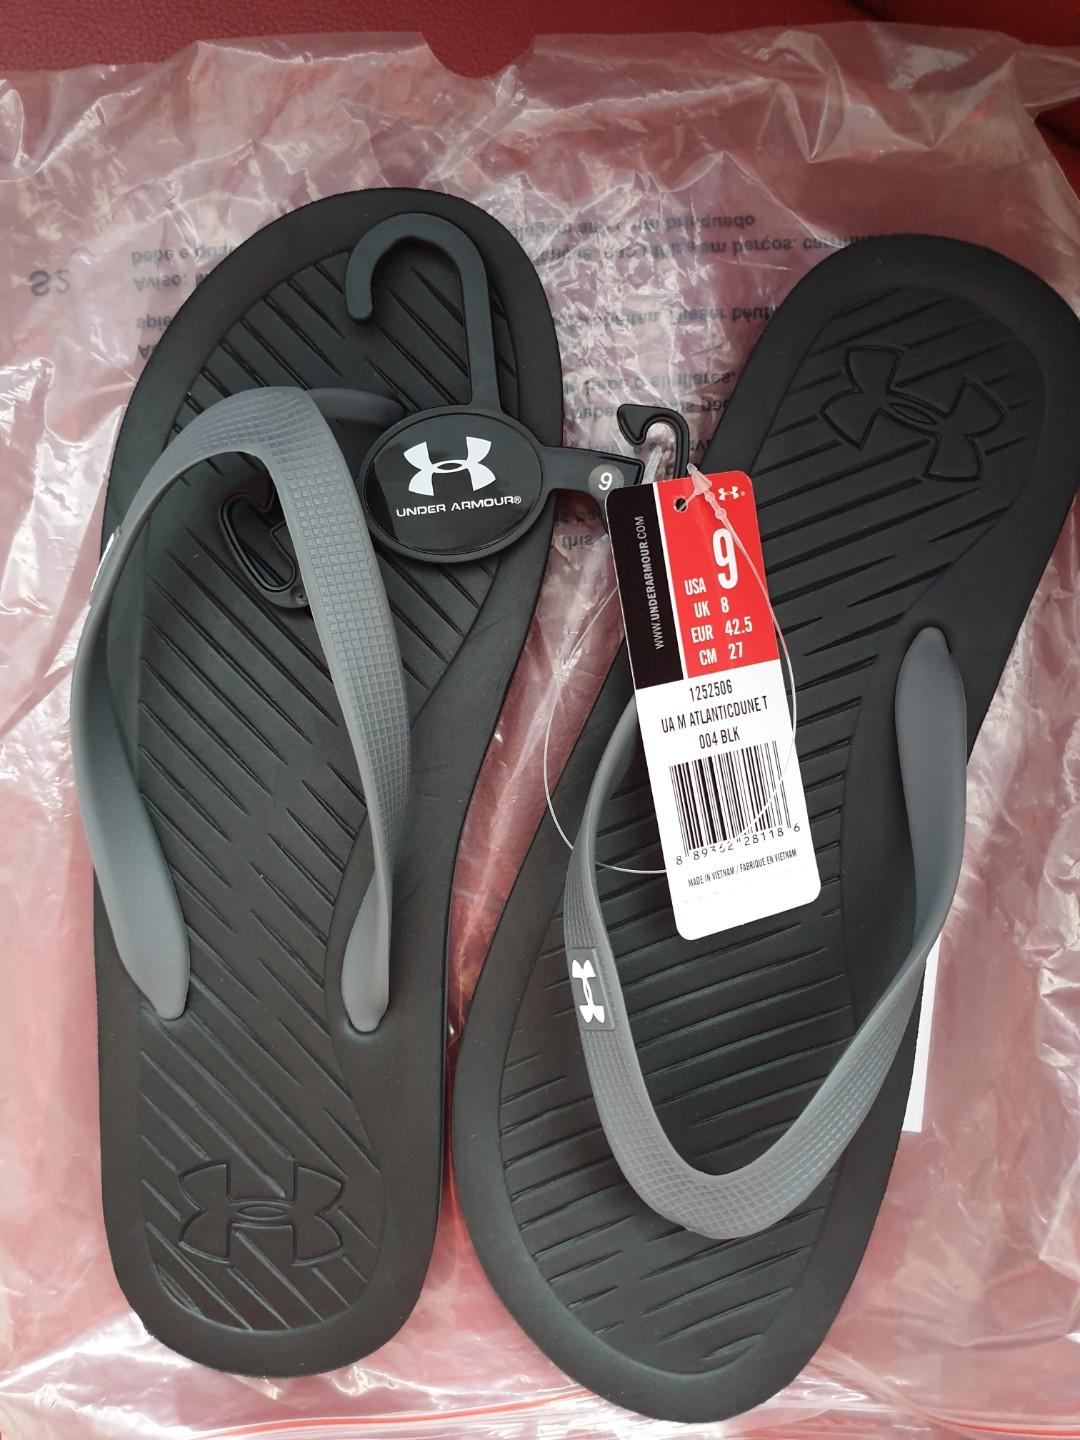 New Authentic Under Armour Slippers 